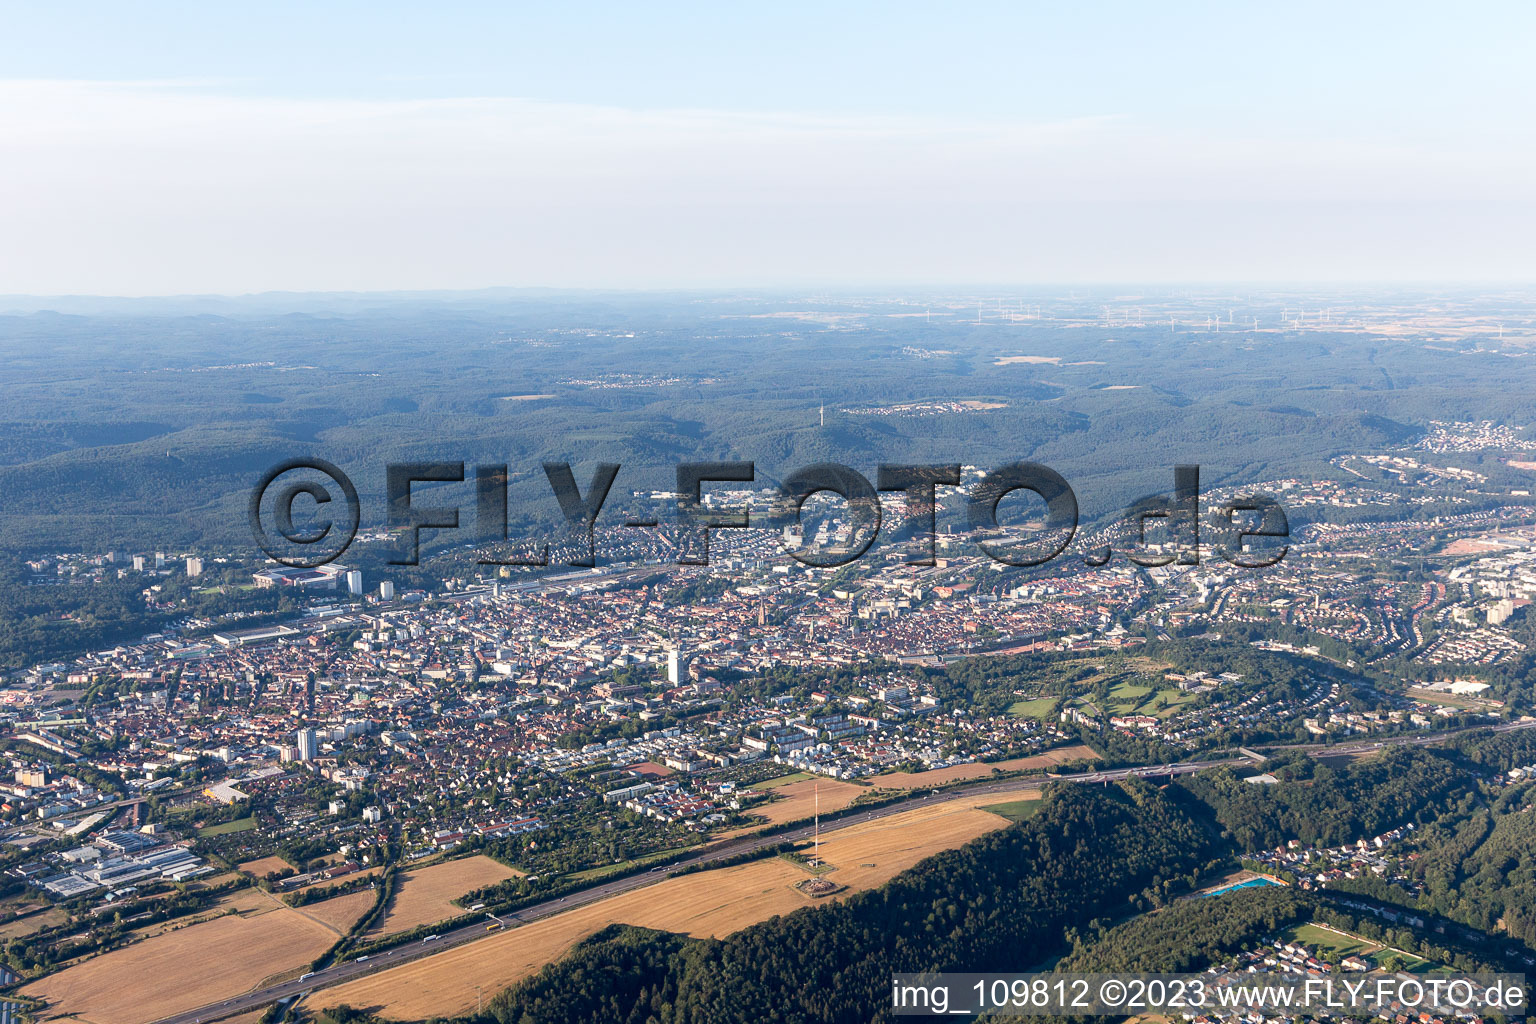 Kaiserslautern in the state Rhineland-Palatinate, Germany seen from above